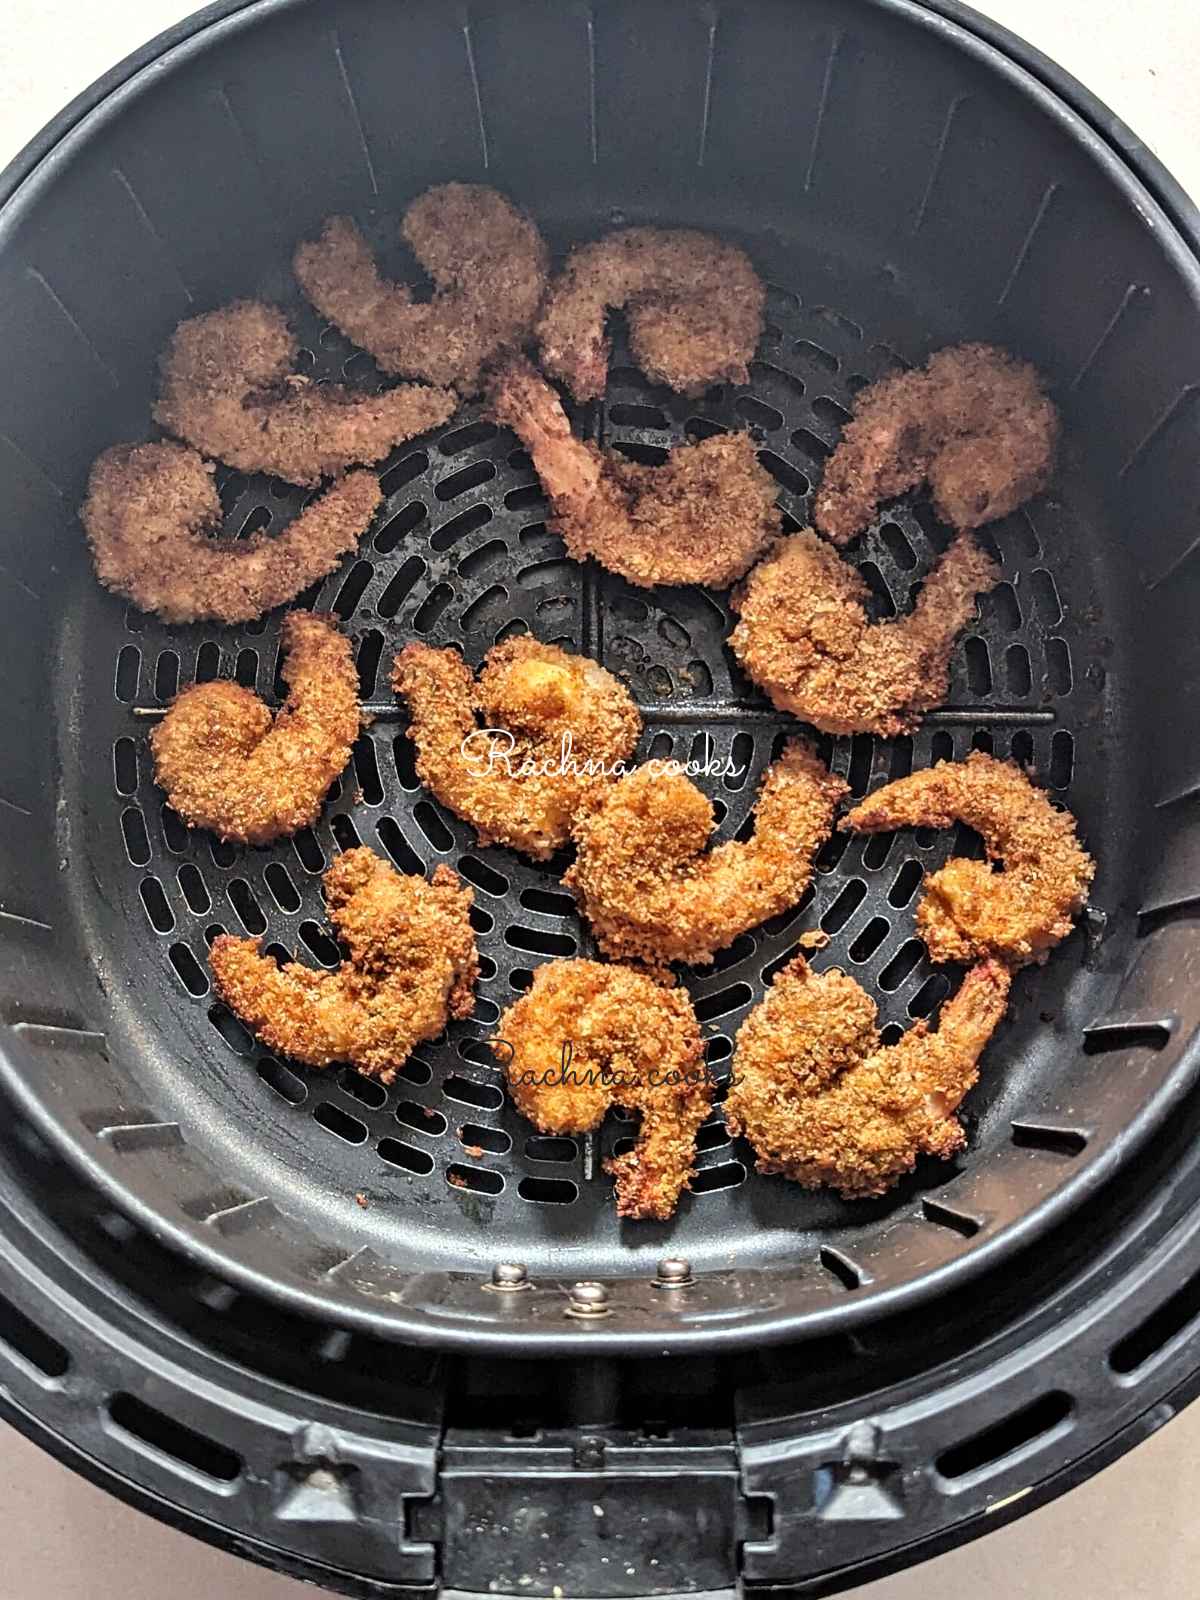 Popcorn shrimp done to perfection in air fryer basket.